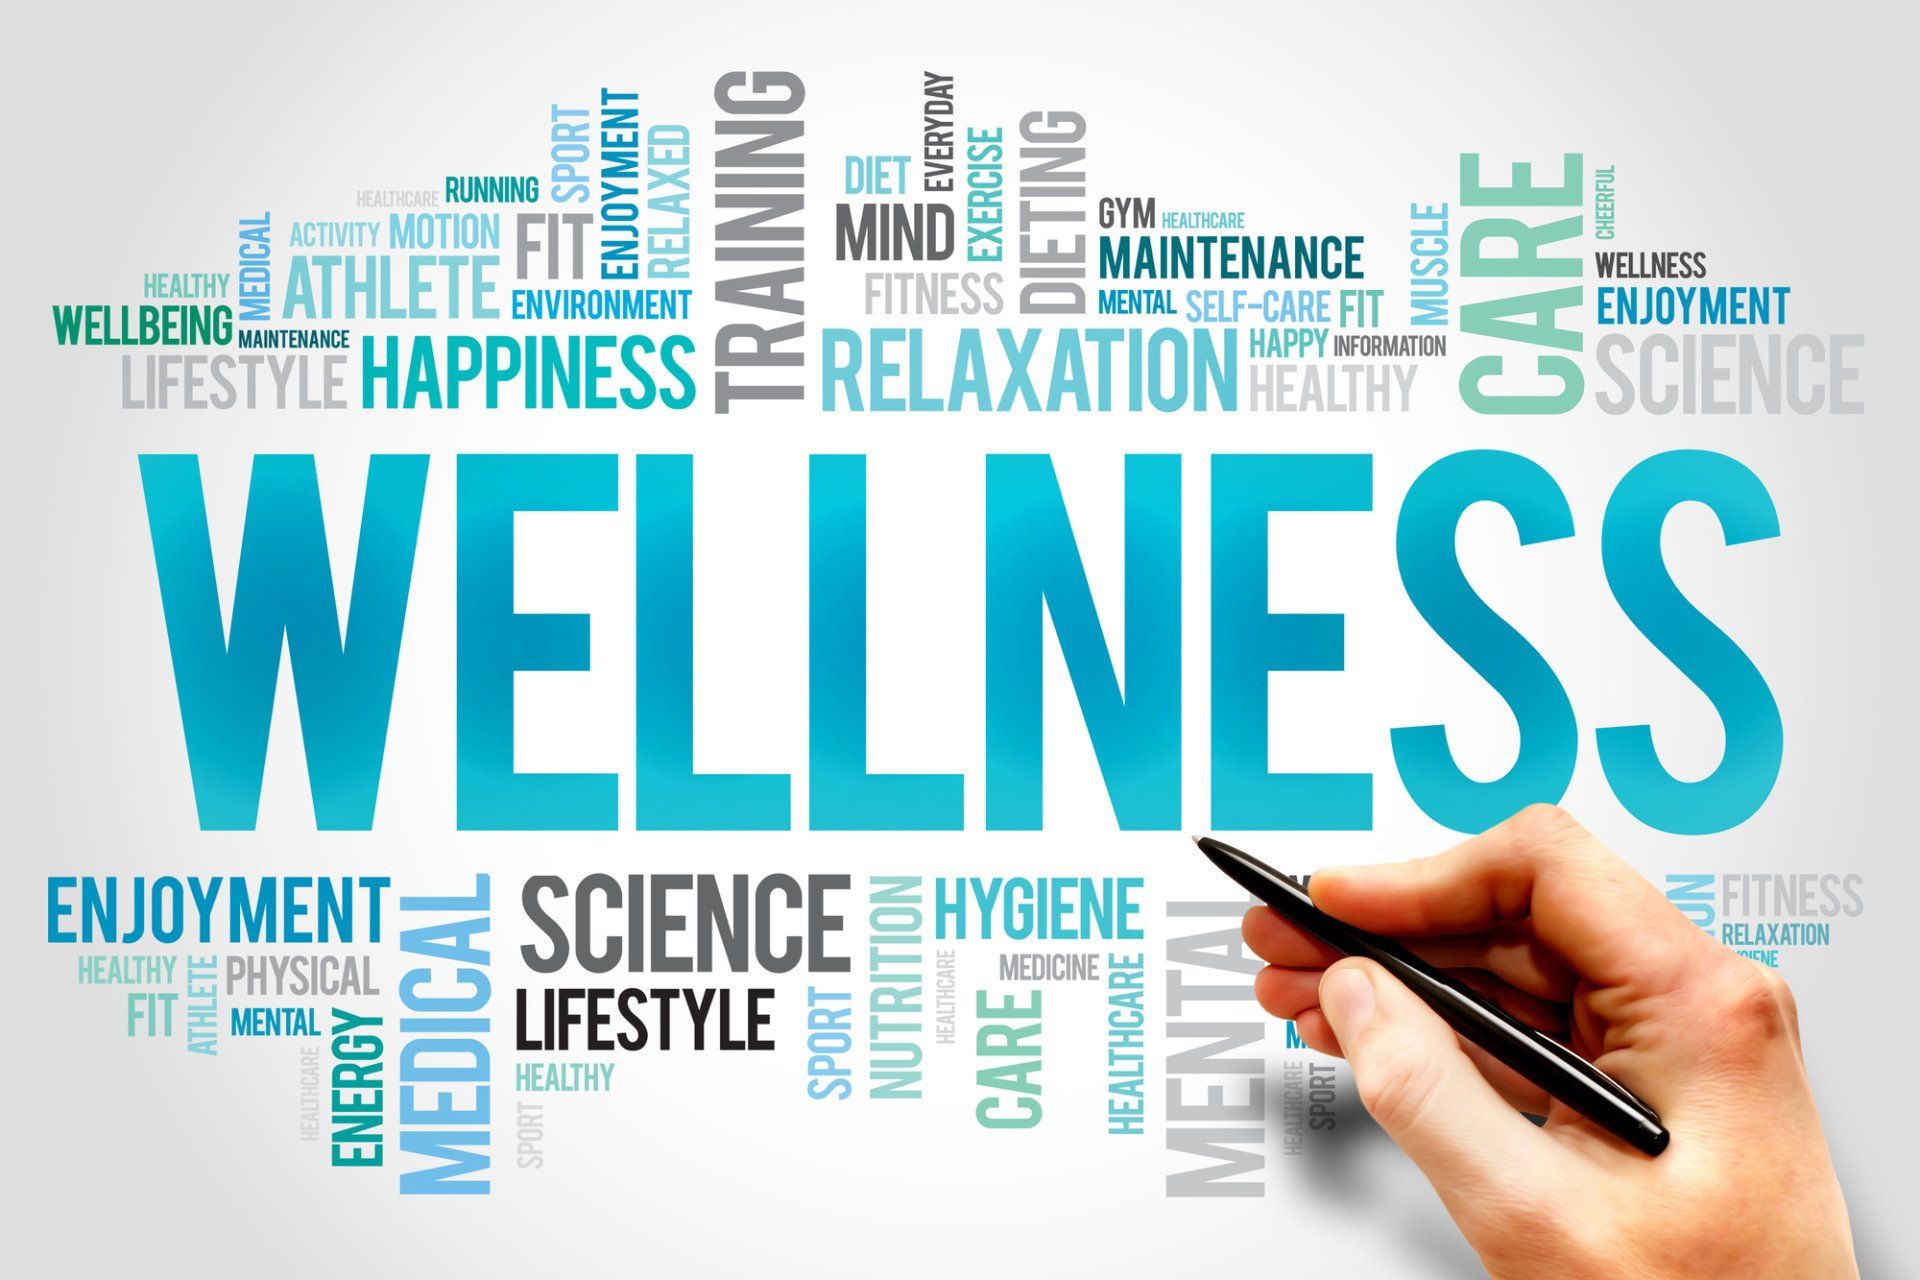 what is wellness